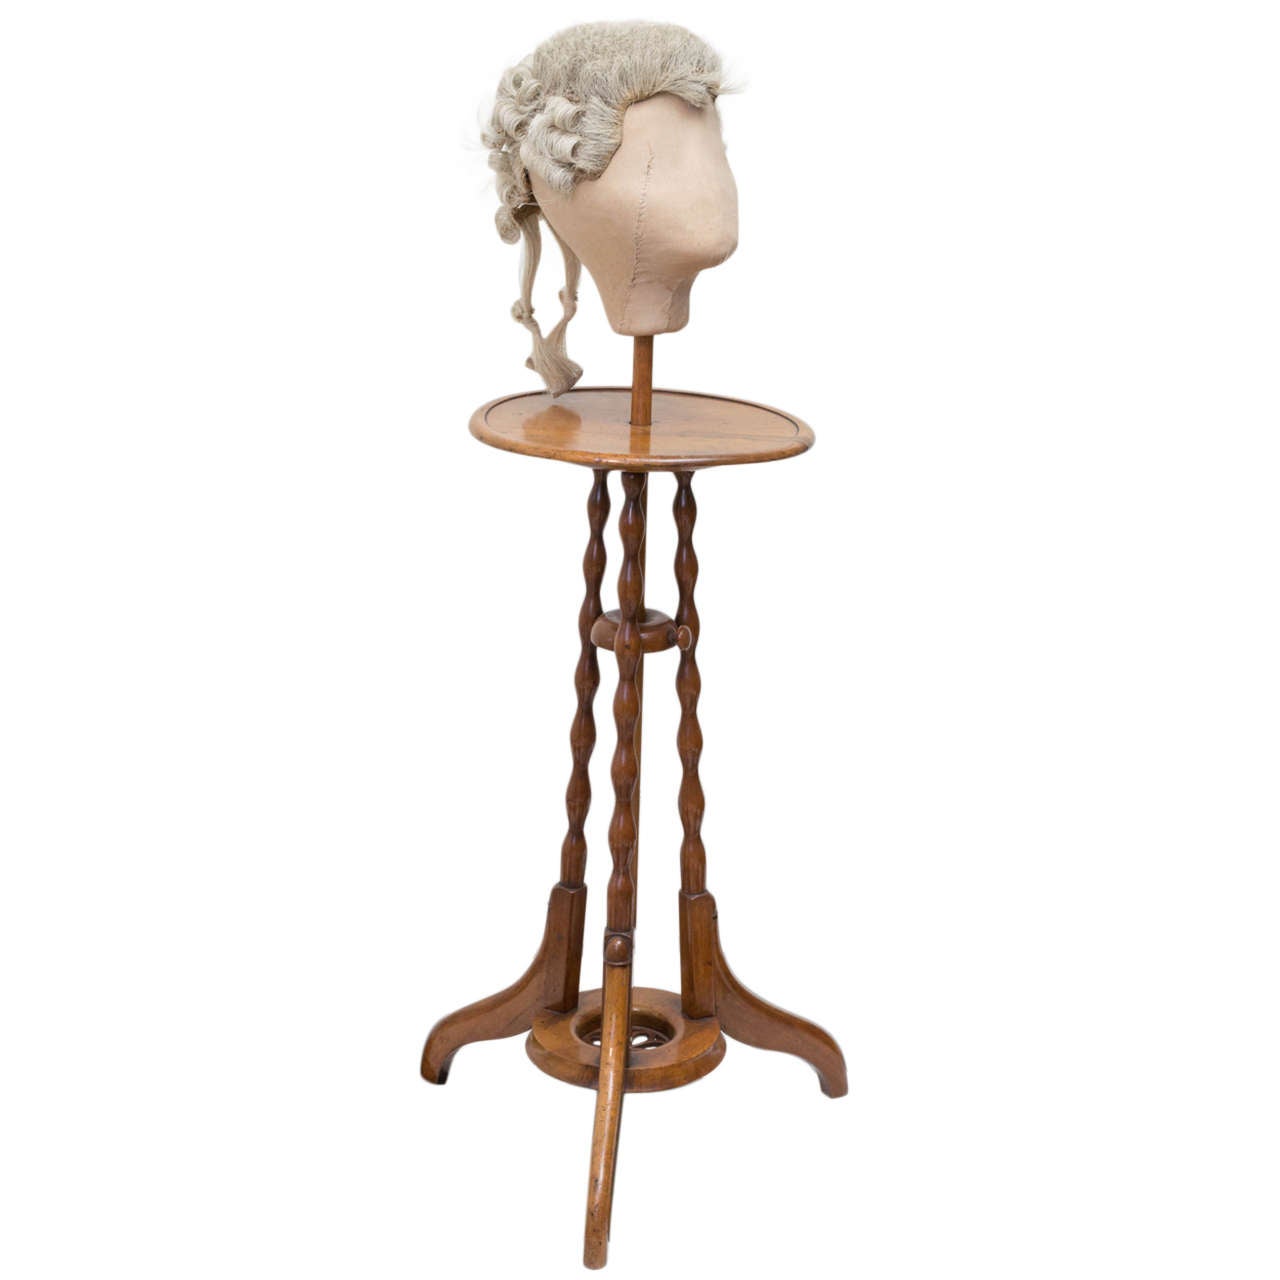 19th c. English William IV Wig  Stand With Wig